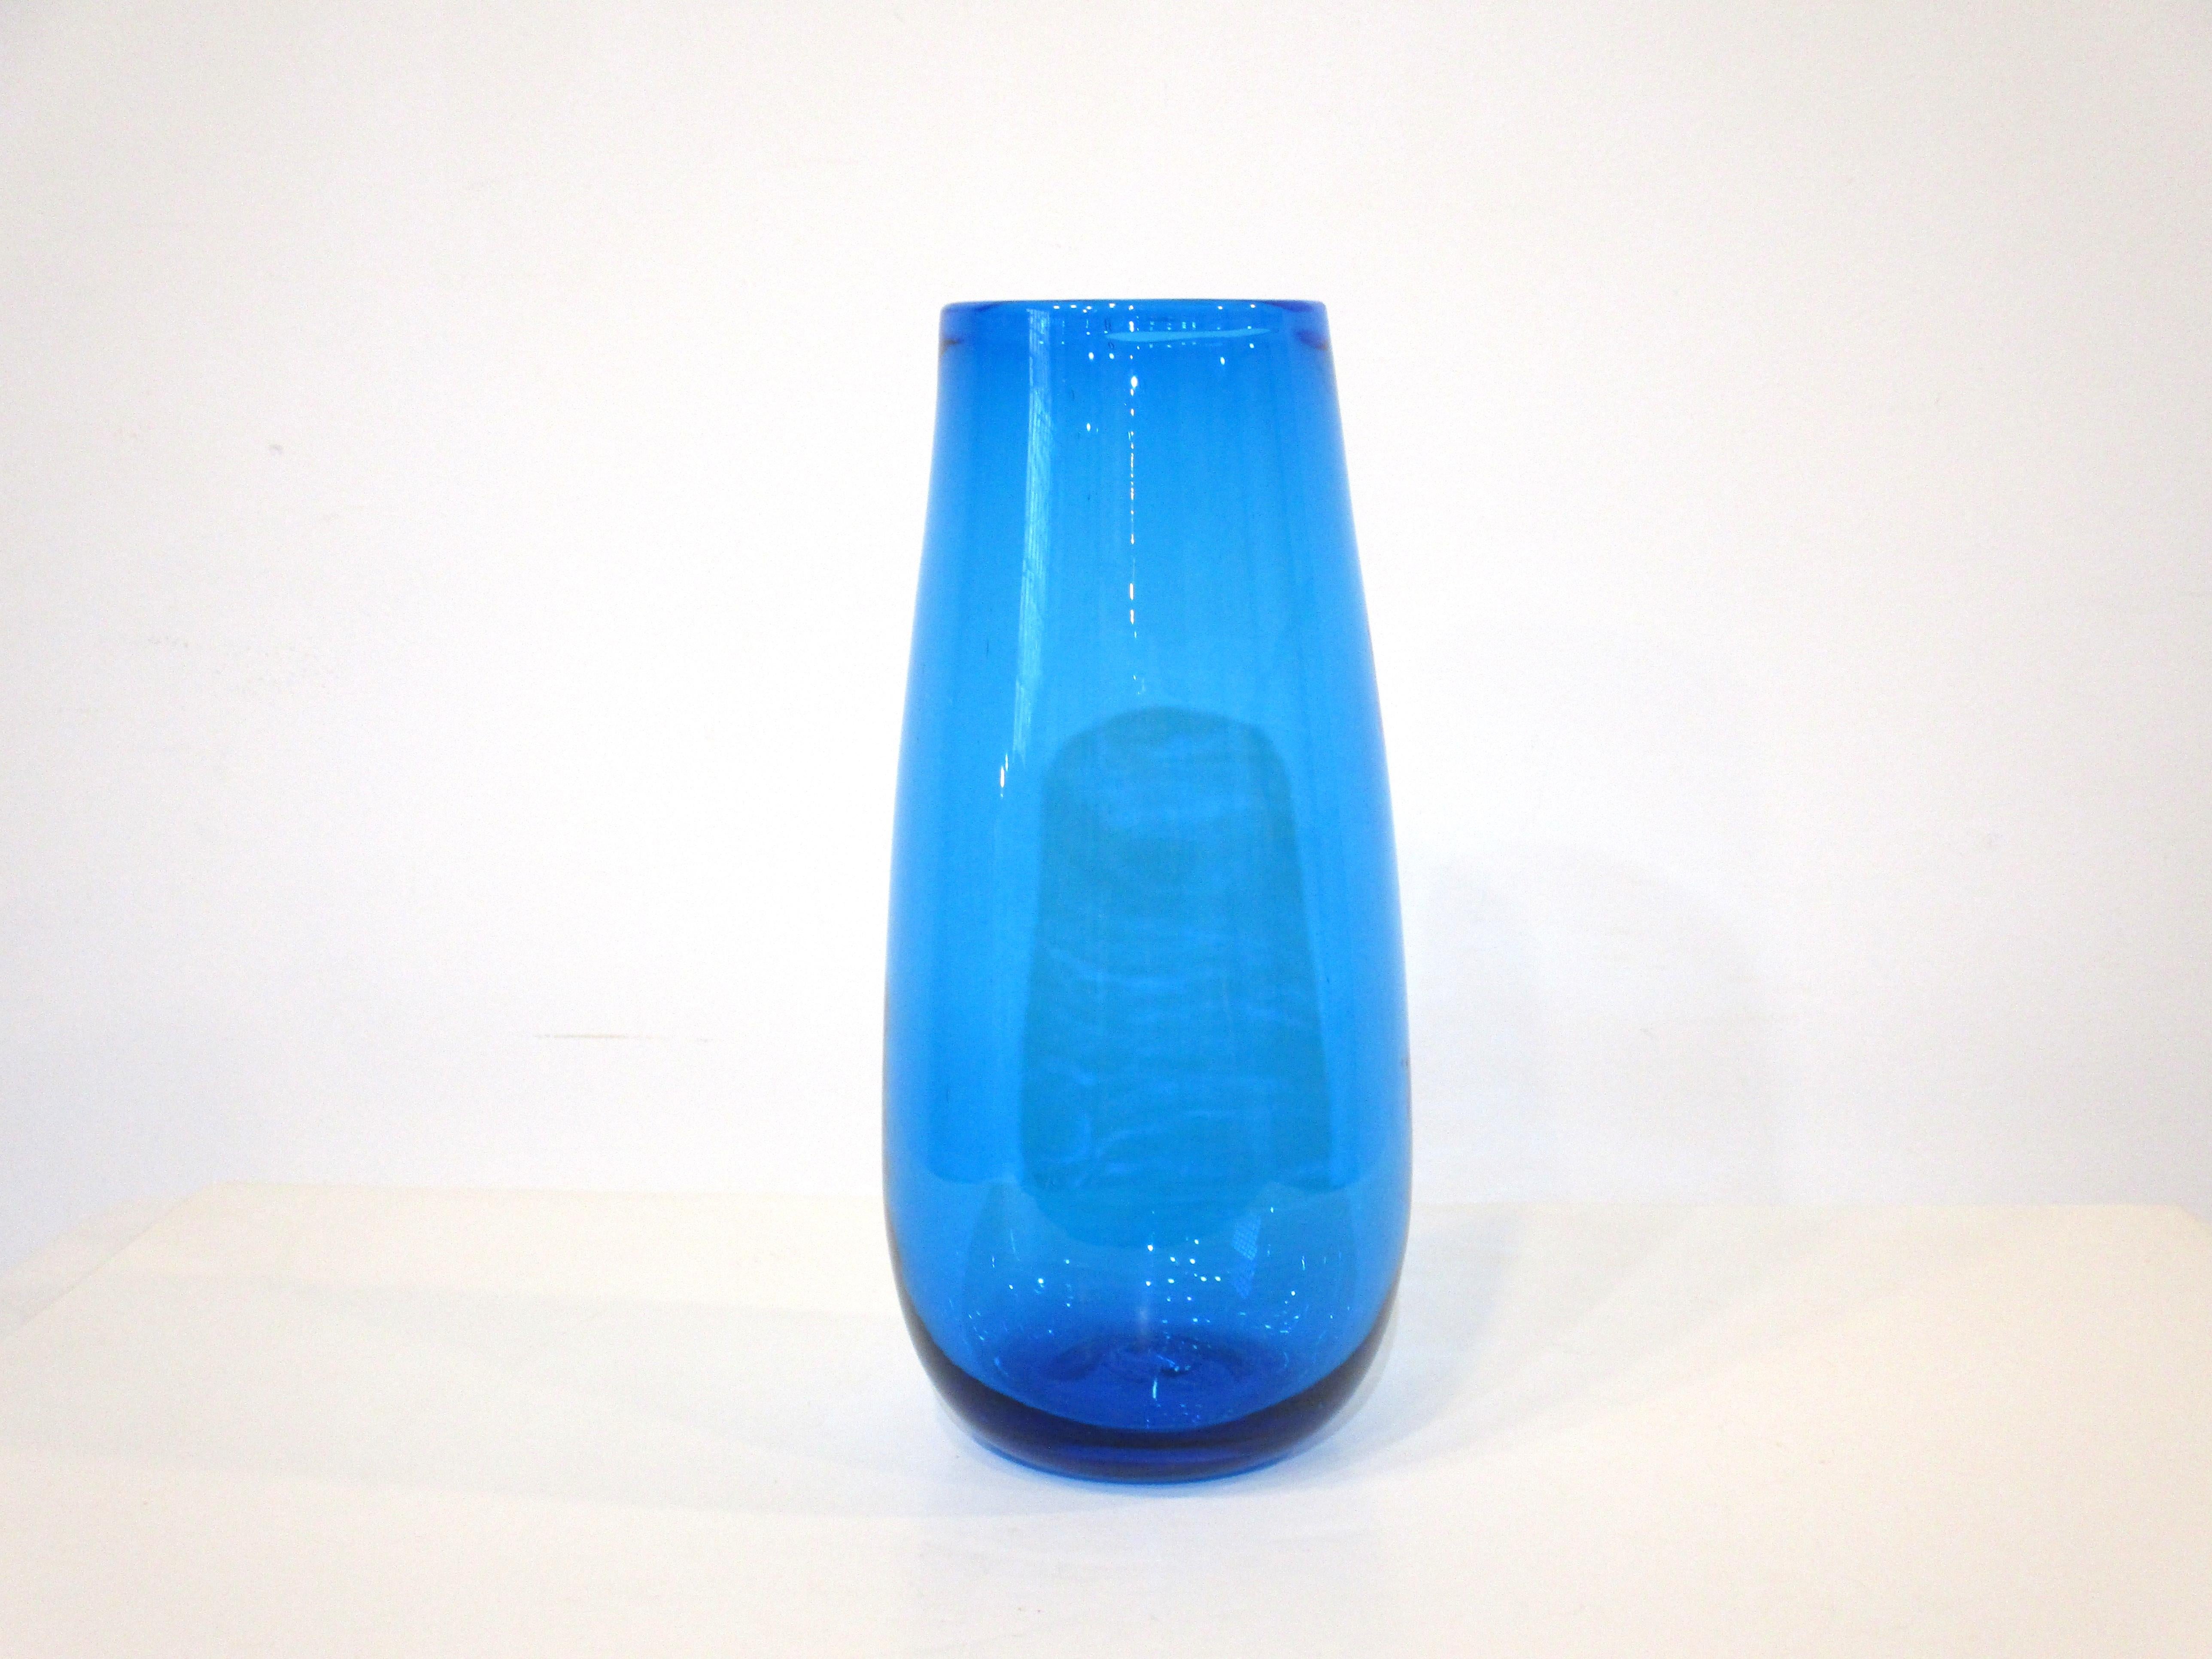 A handblown blue glass vase by artist Wayne Husted for the Blenko Glass company one of the top glass companies during the Mid Century era. Colorful ocean blue tone perfect for flowers and other arrangements.